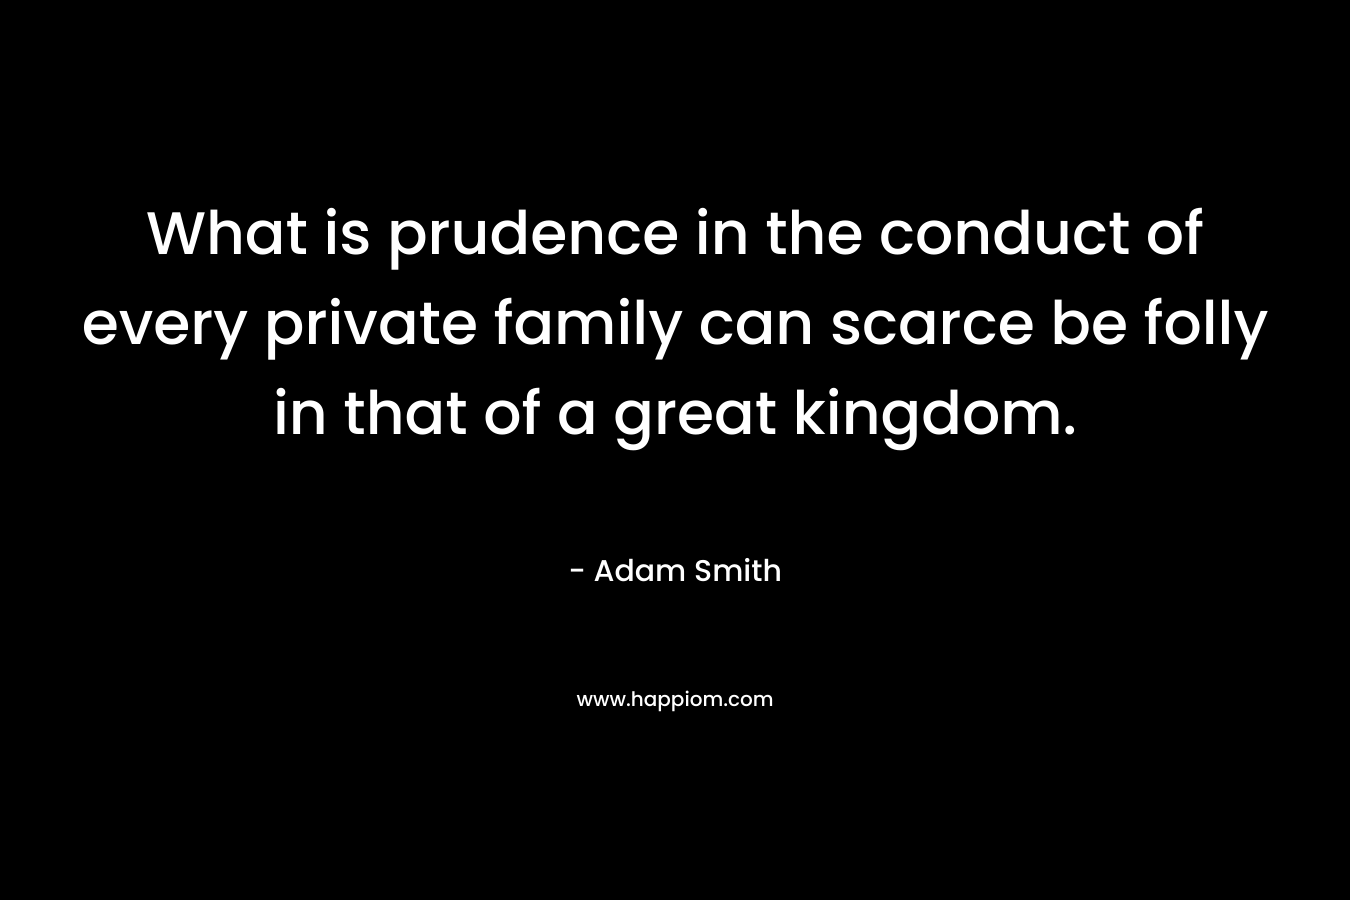 What is prudence in the conduct of every private family can scarce be folly in that of a great kingdom. – Adam Smith